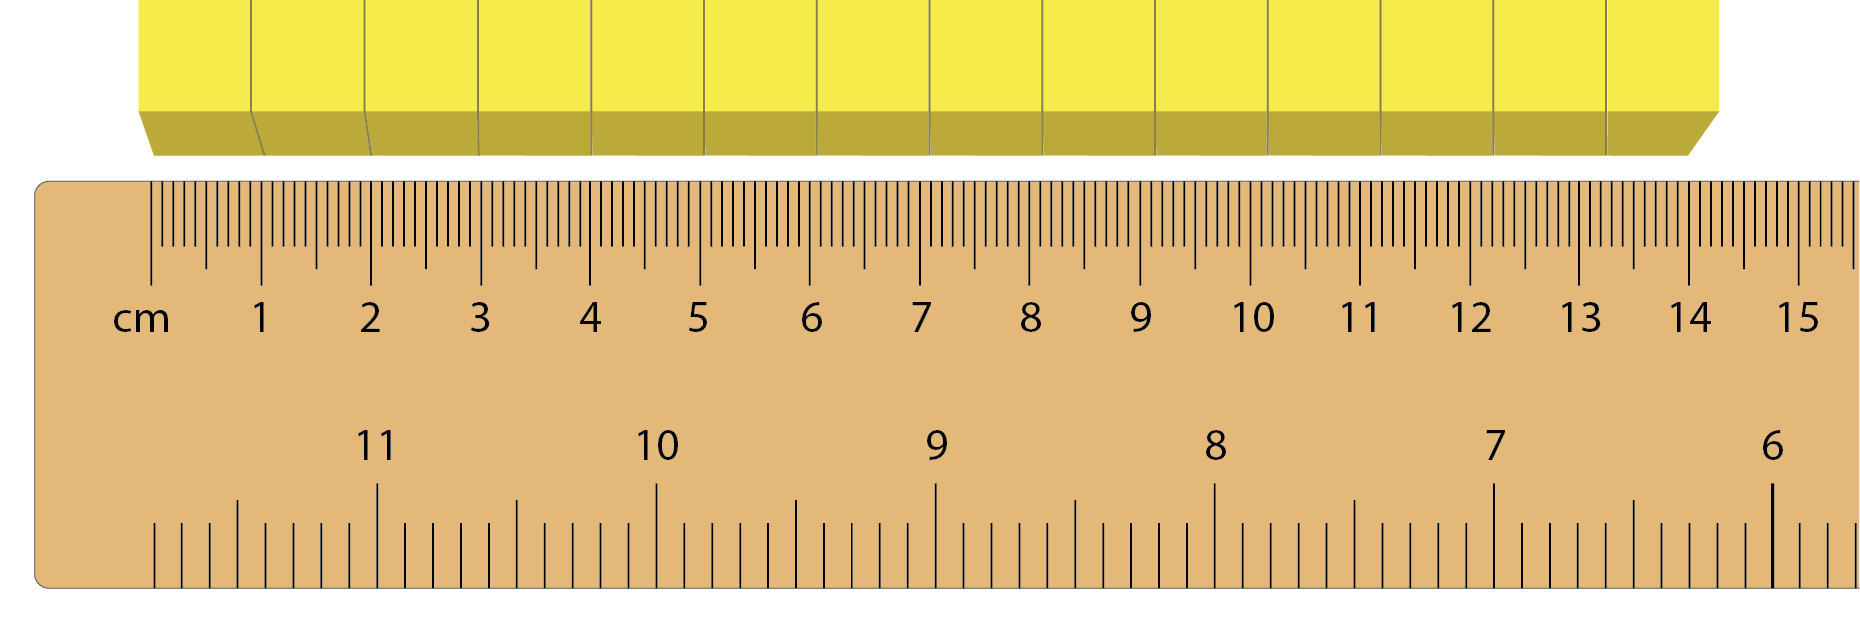 Image of a ruler being used to measure the length of a row of cubes.